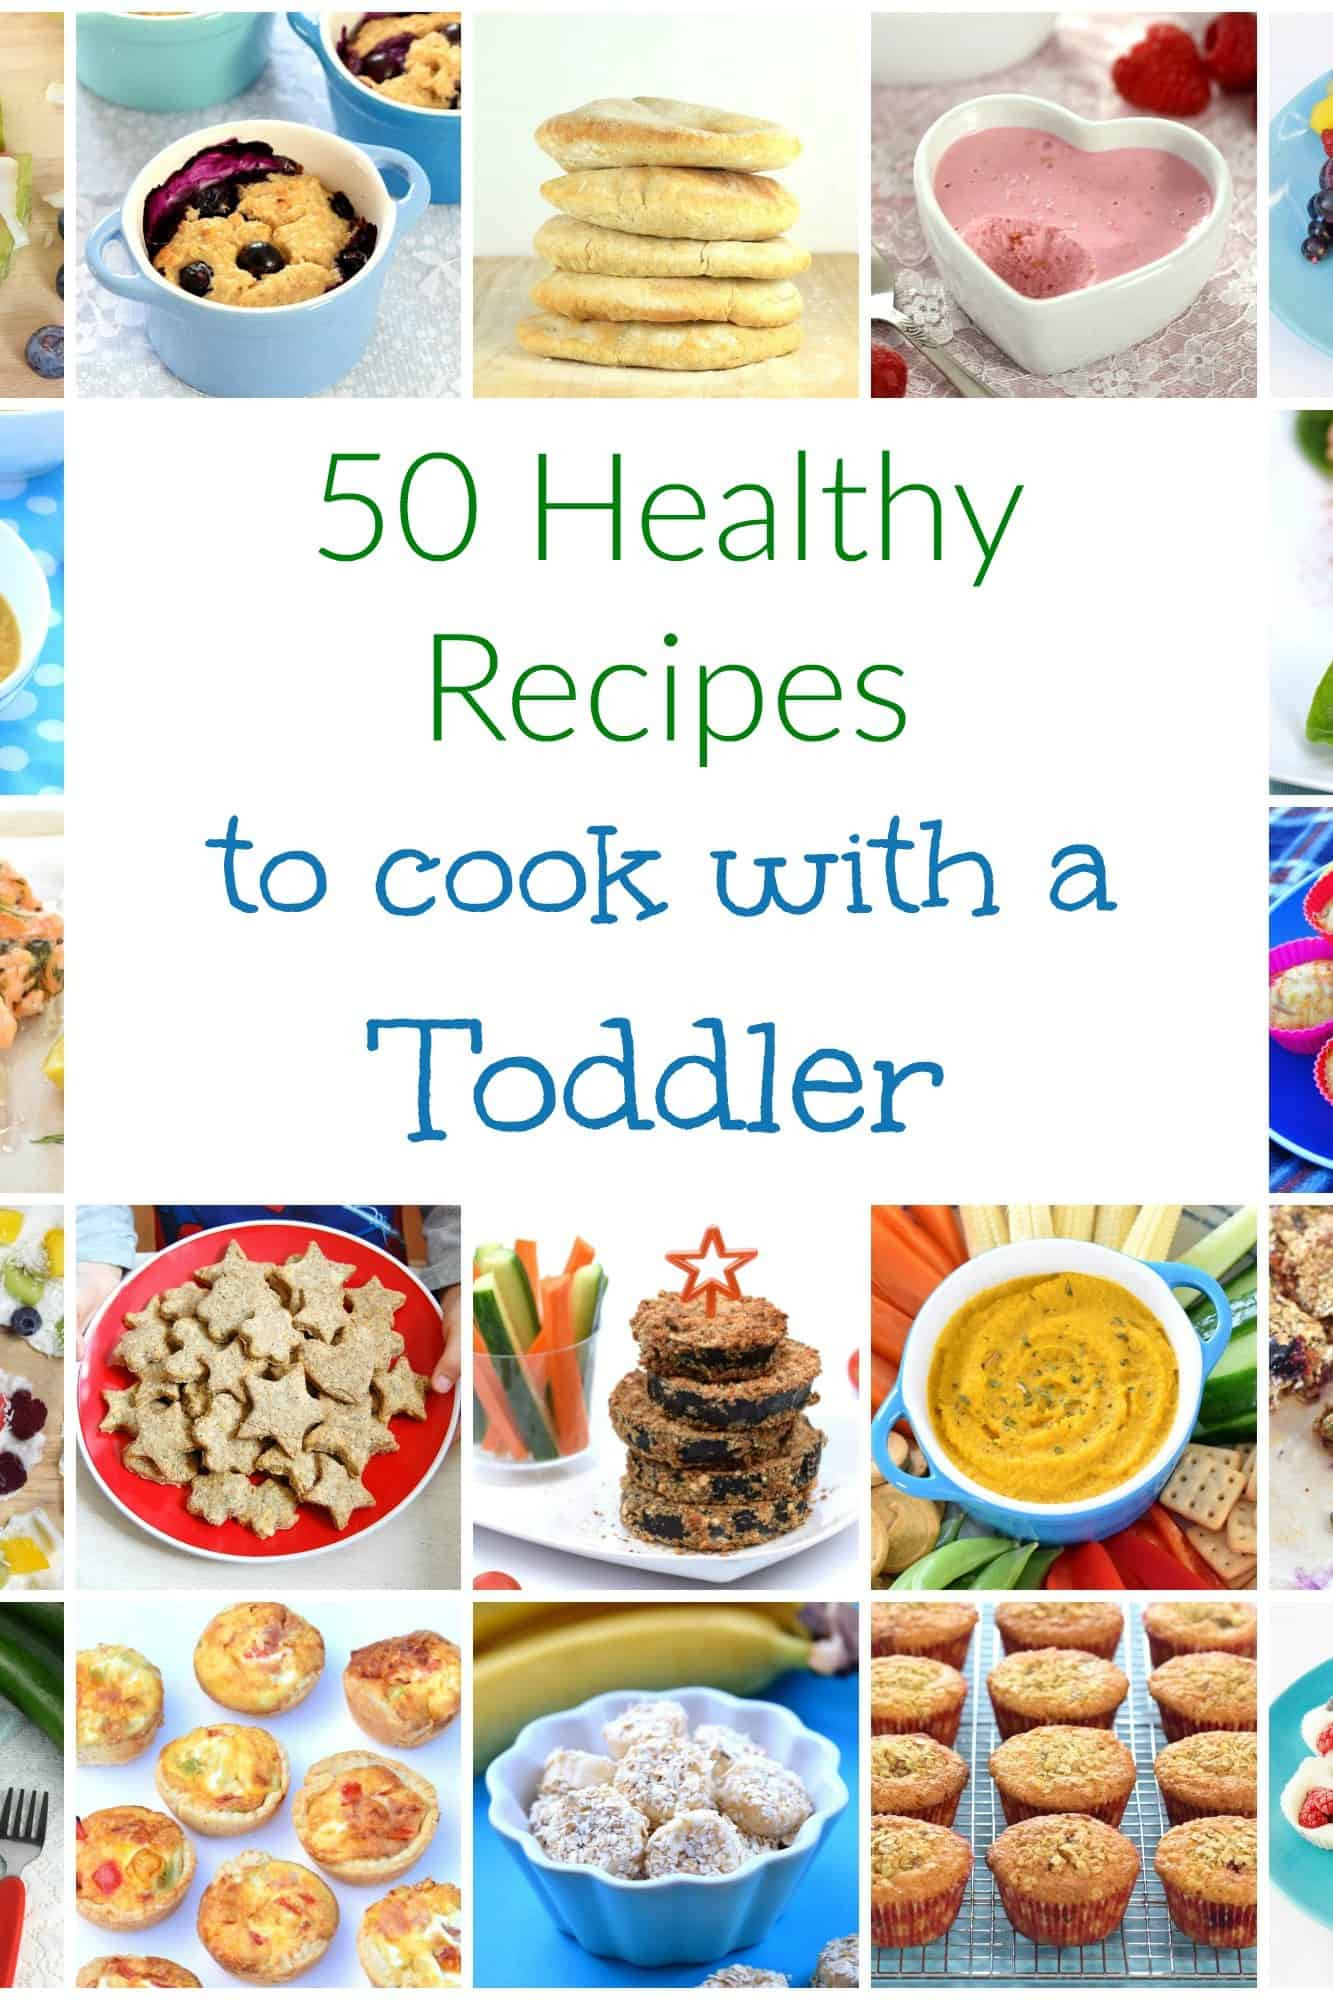 Great Recipes For Kids
 50 Healthy Recipes to Cook with Toddlers